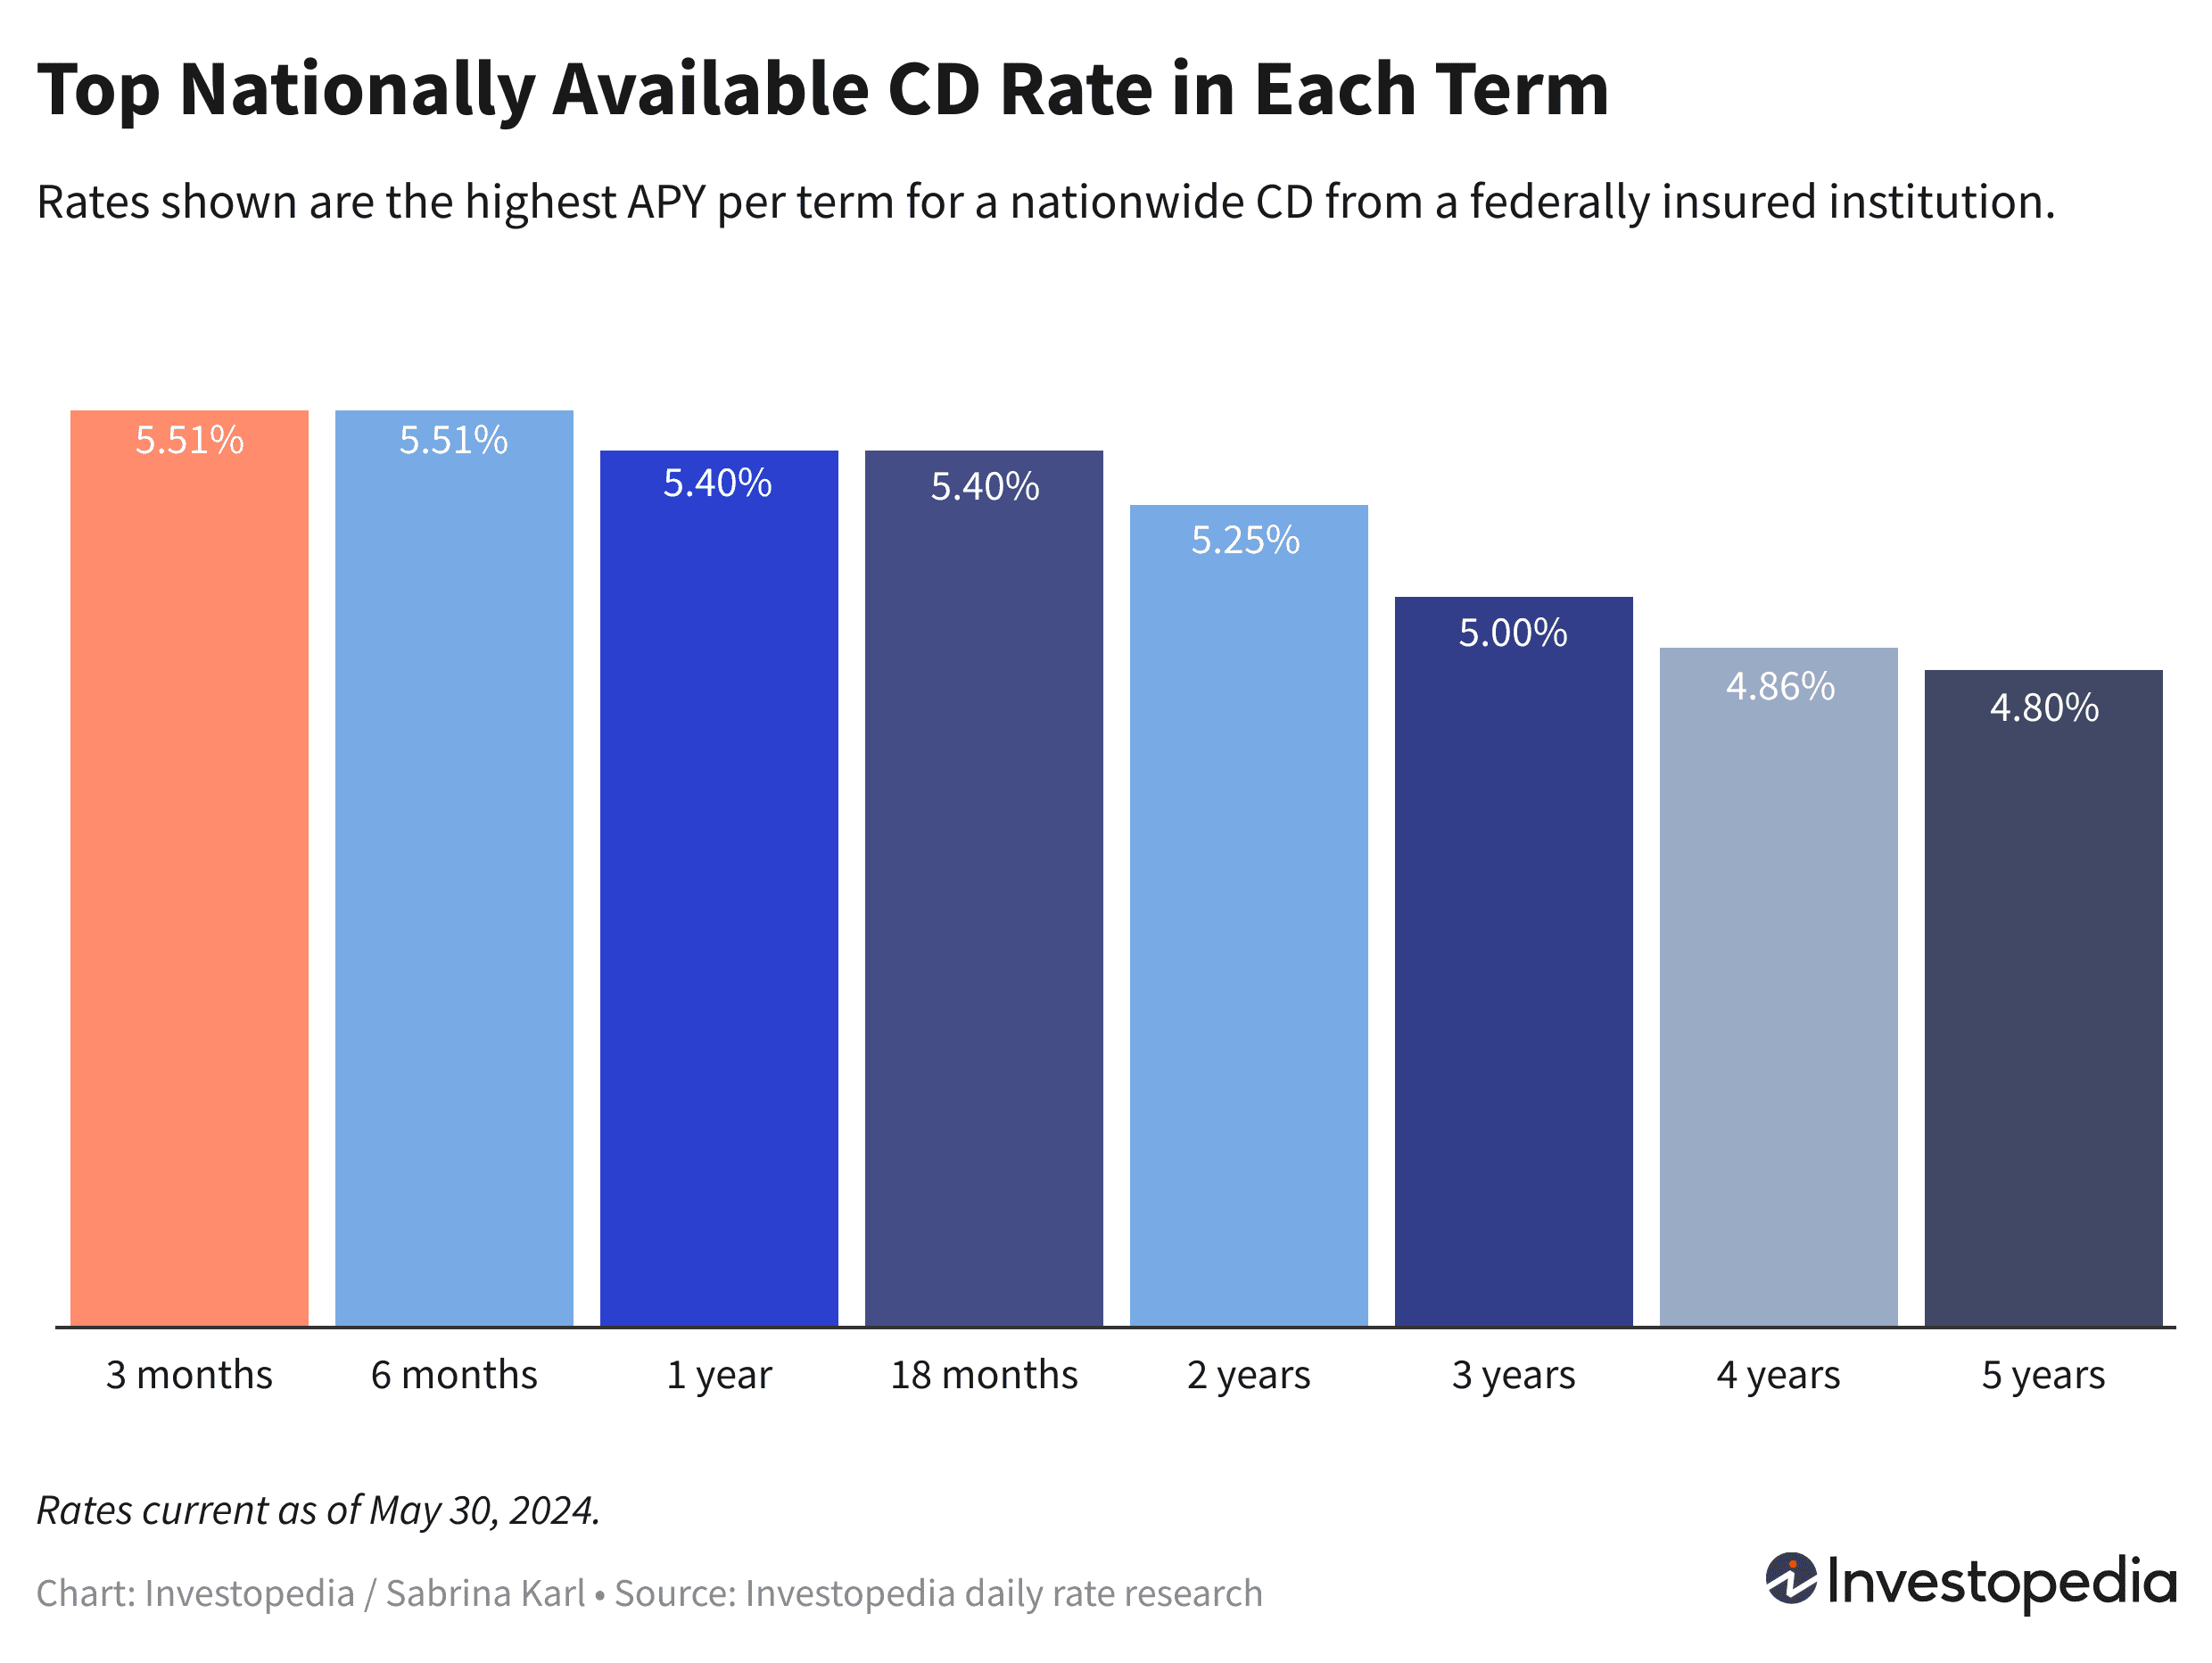 Top nationwide CD rate in each term, ranging from 4.80% to 5.51%, current as of May 30, 2024.